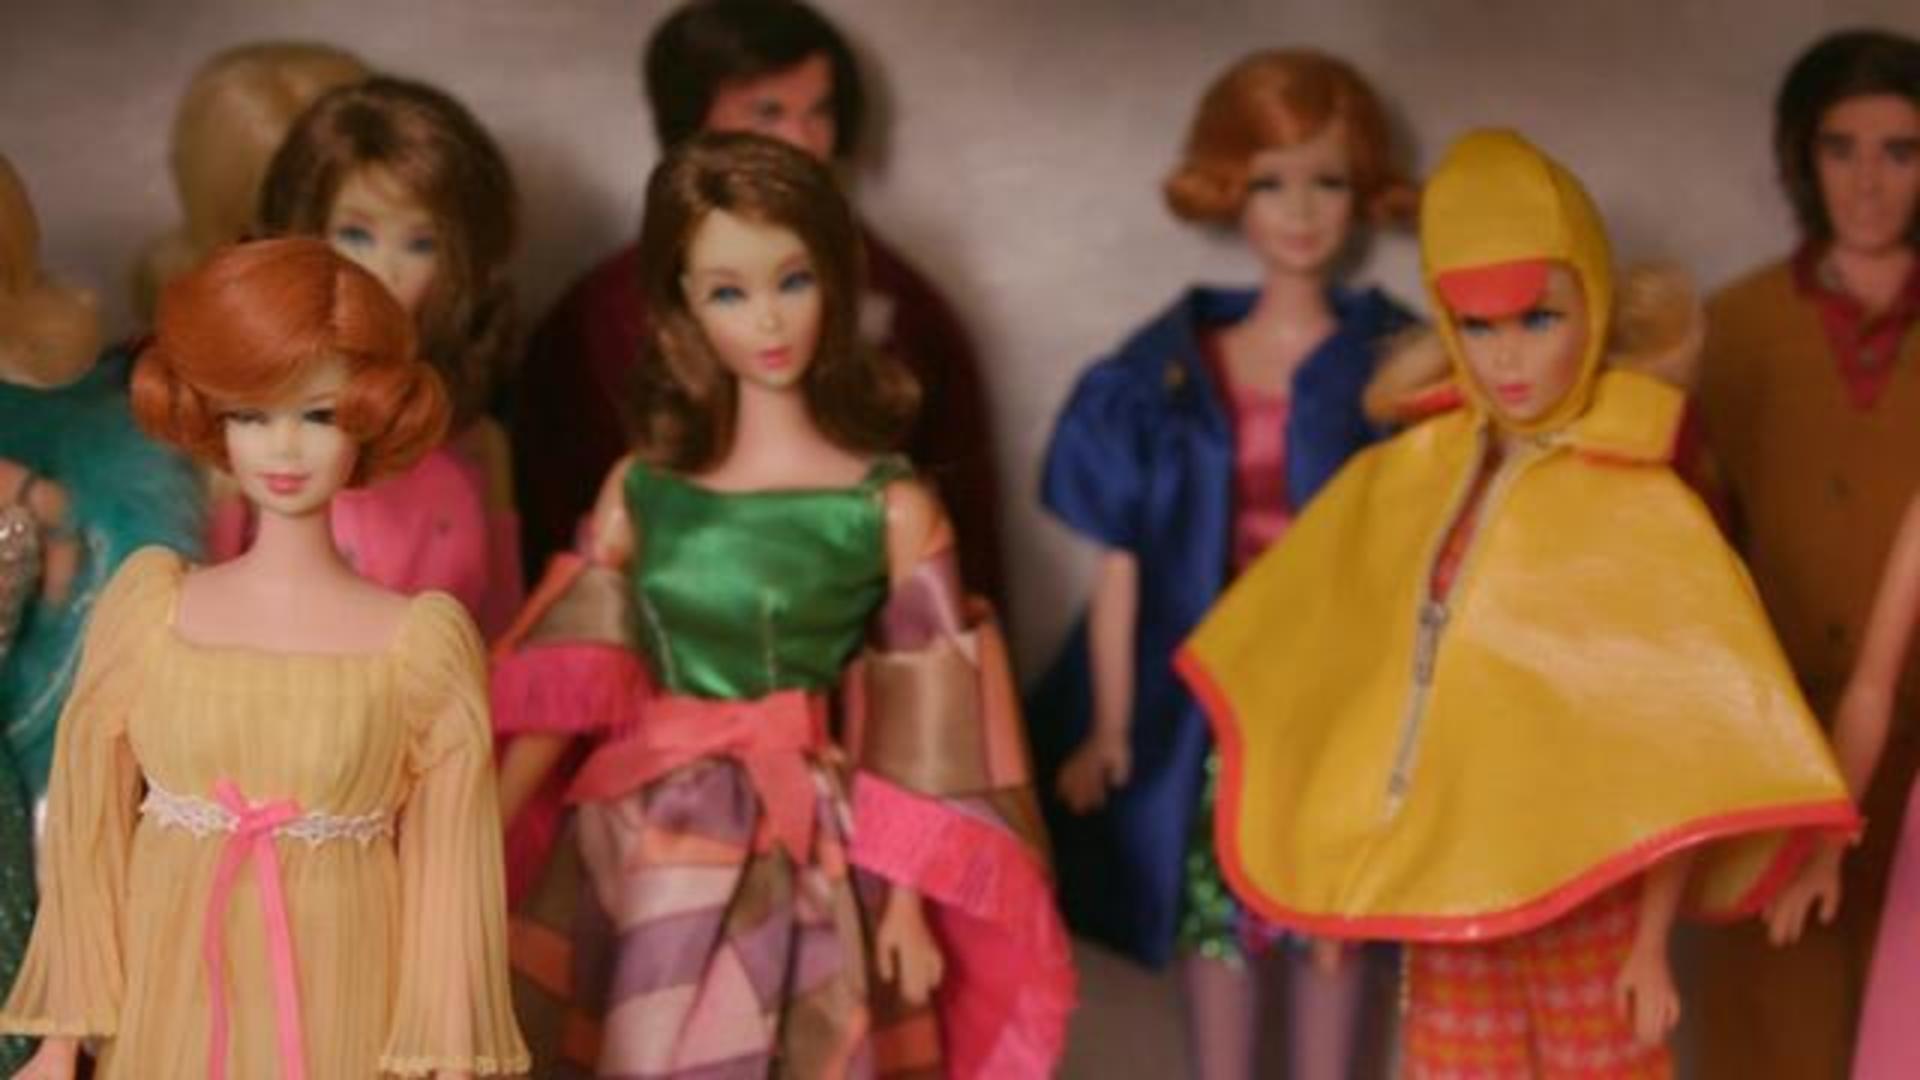 How Barbie dolls changed the way girls viewed themselves and their role in  society in the 1960s - CBS News